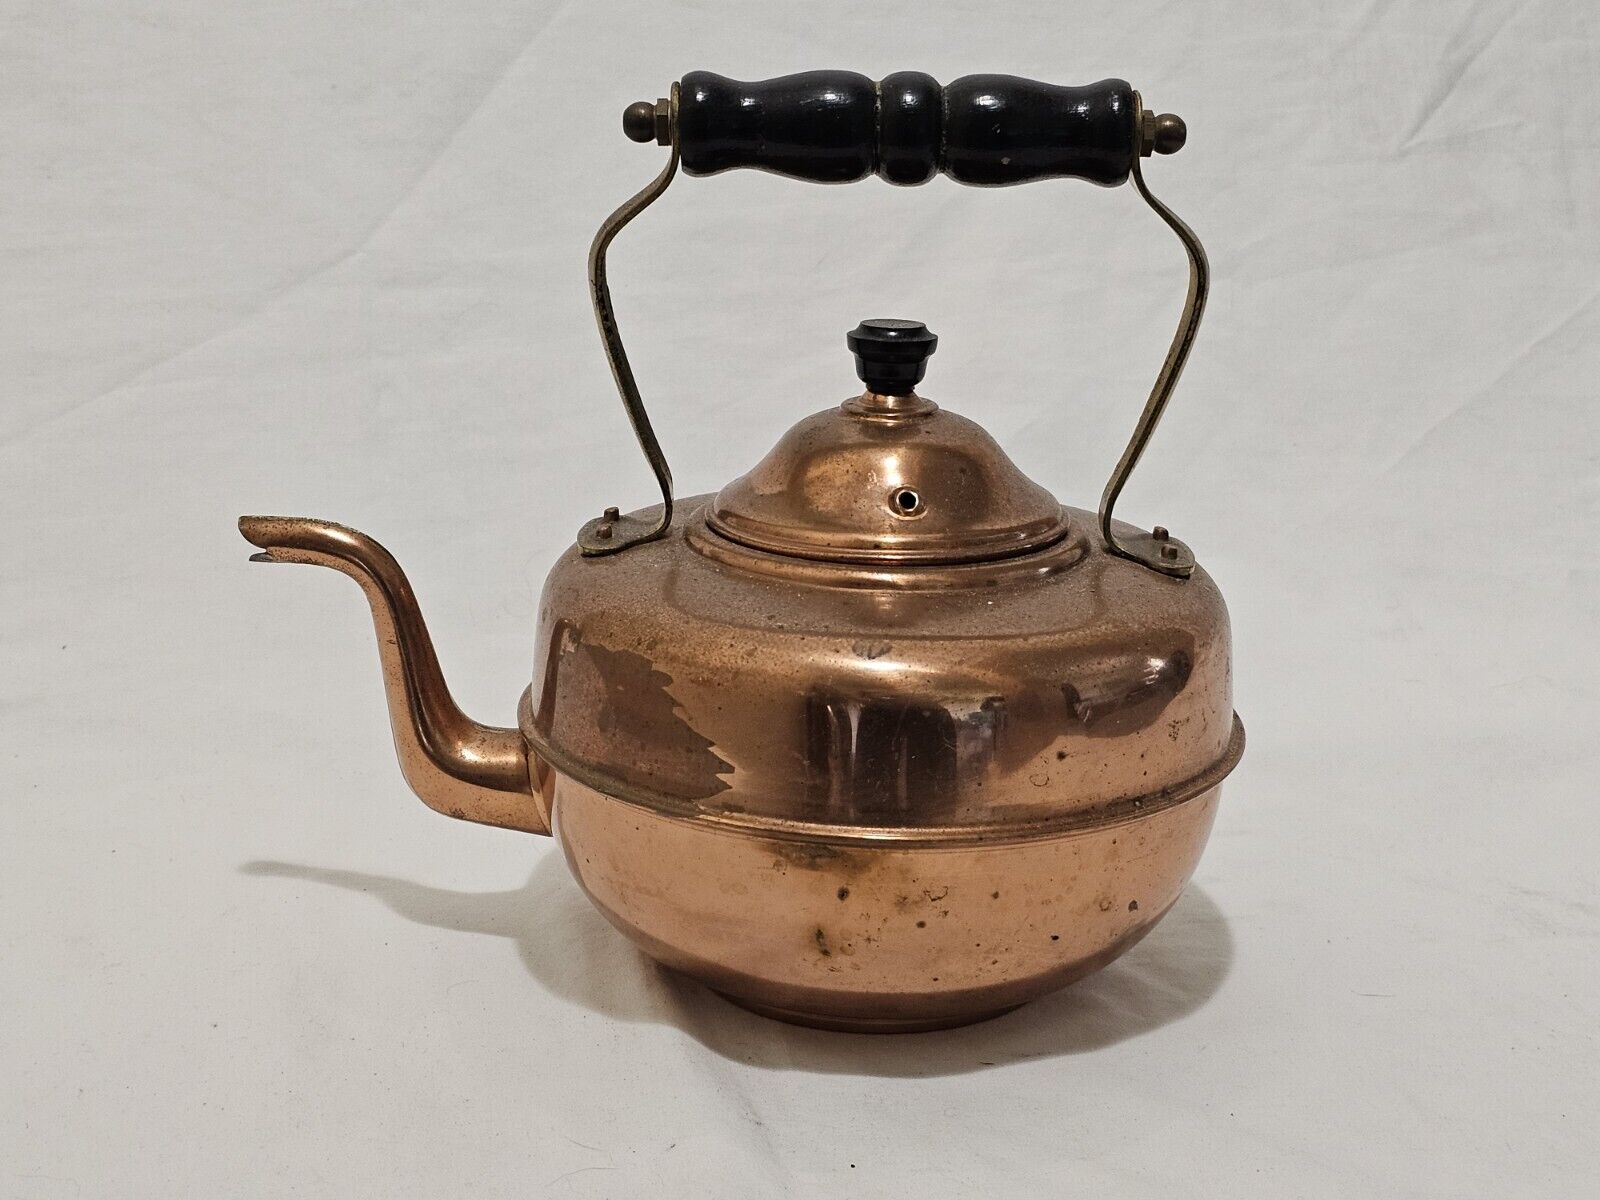 Vintage Copper Teapot Tea Kettle With Wood Handle Marked “Made In England “